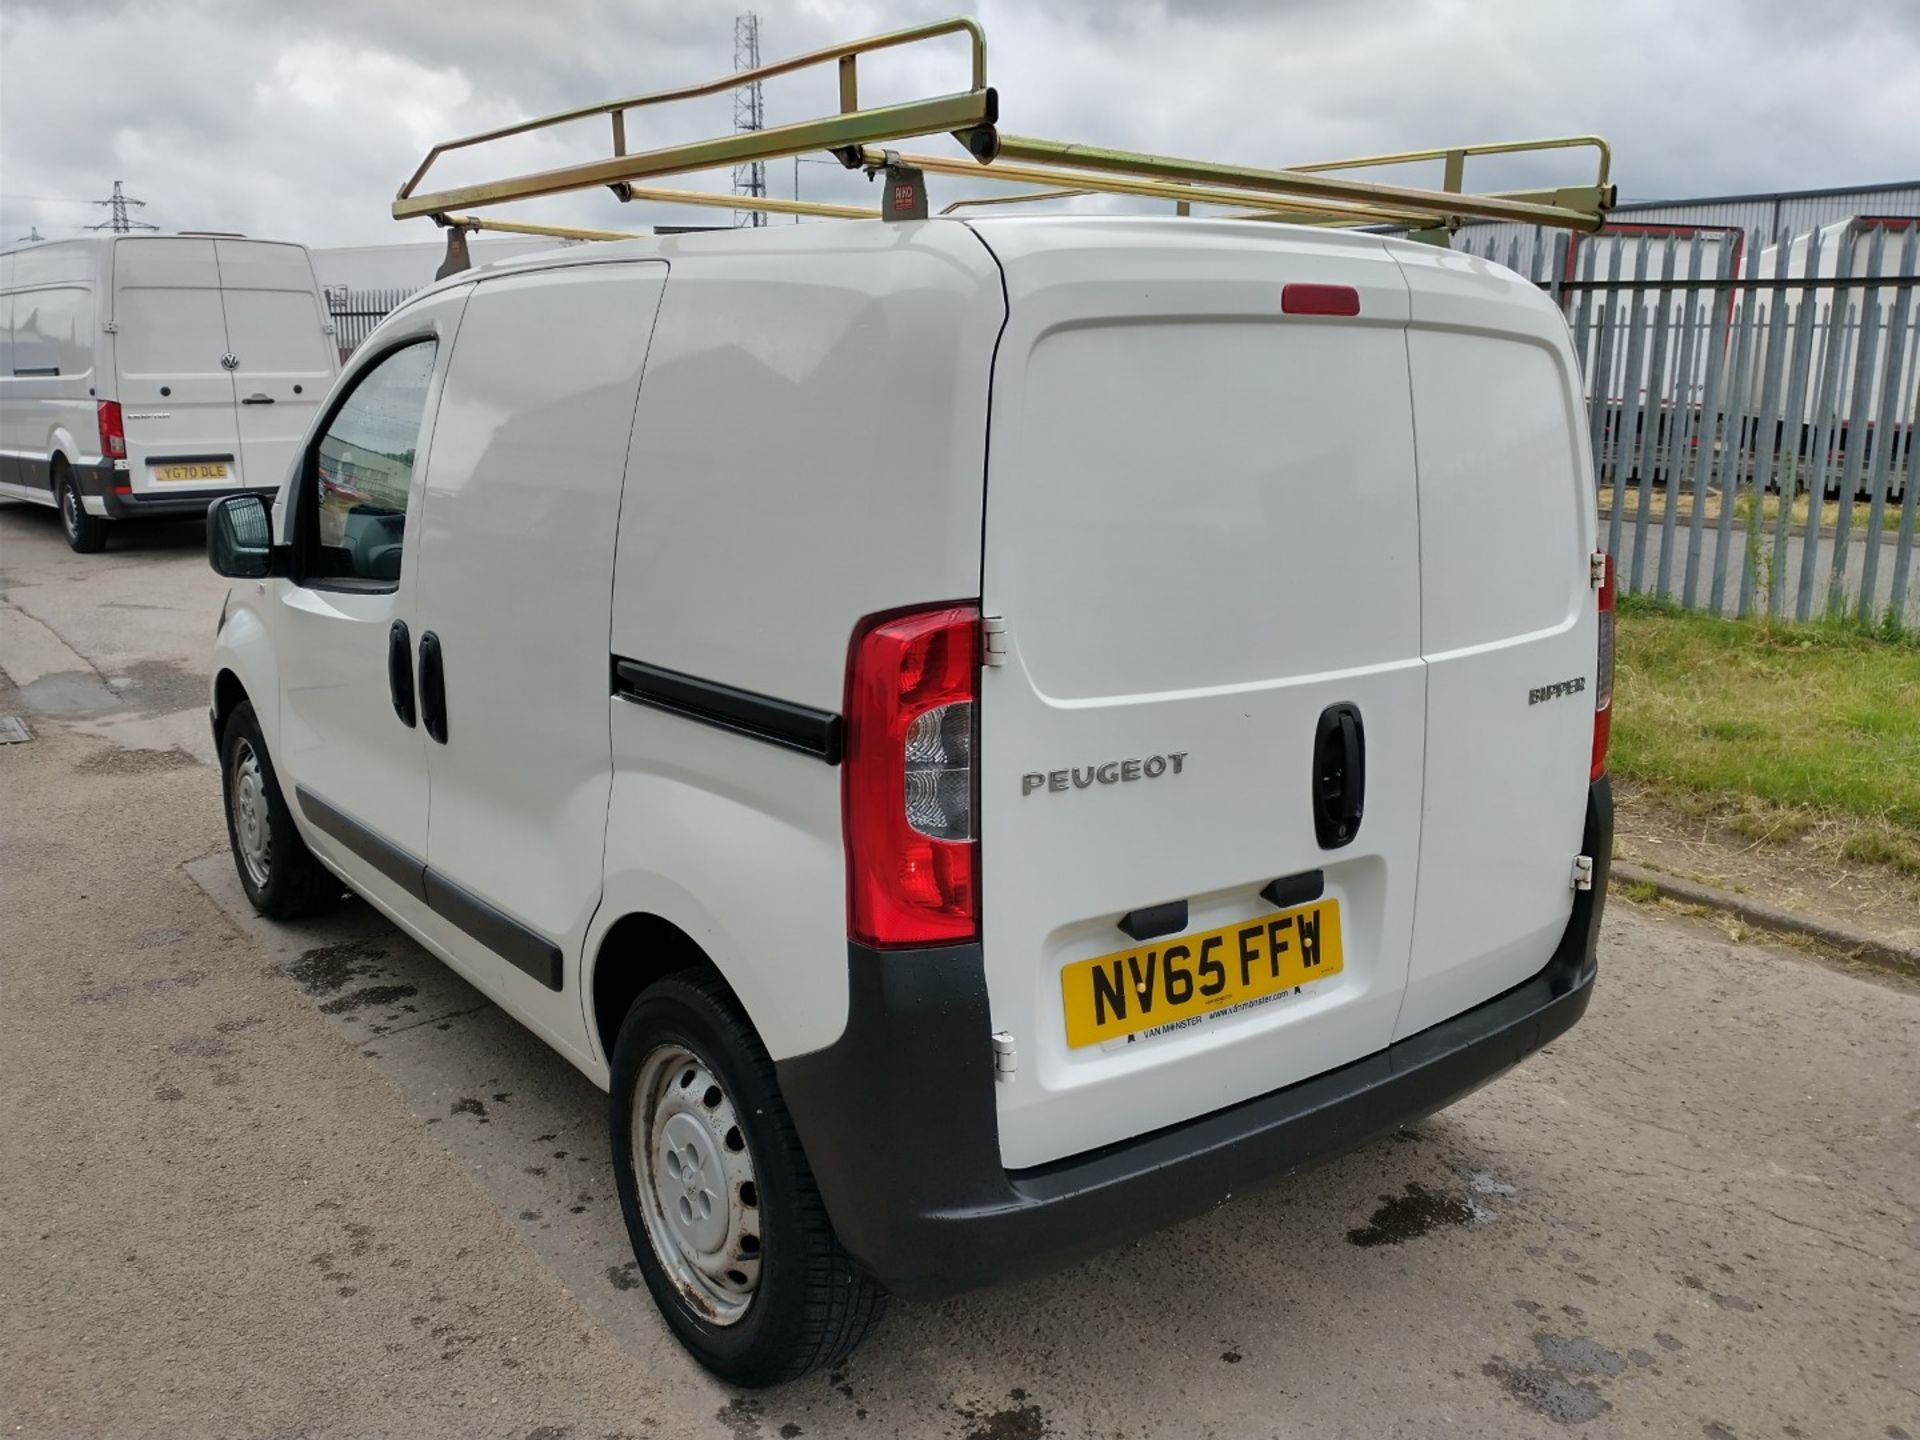 2015 Peugeot Bipper S Hdi White Panel - CL505 - Ref: VVS031 - Location: Corby, Northamptonshire - Image 20 of 25